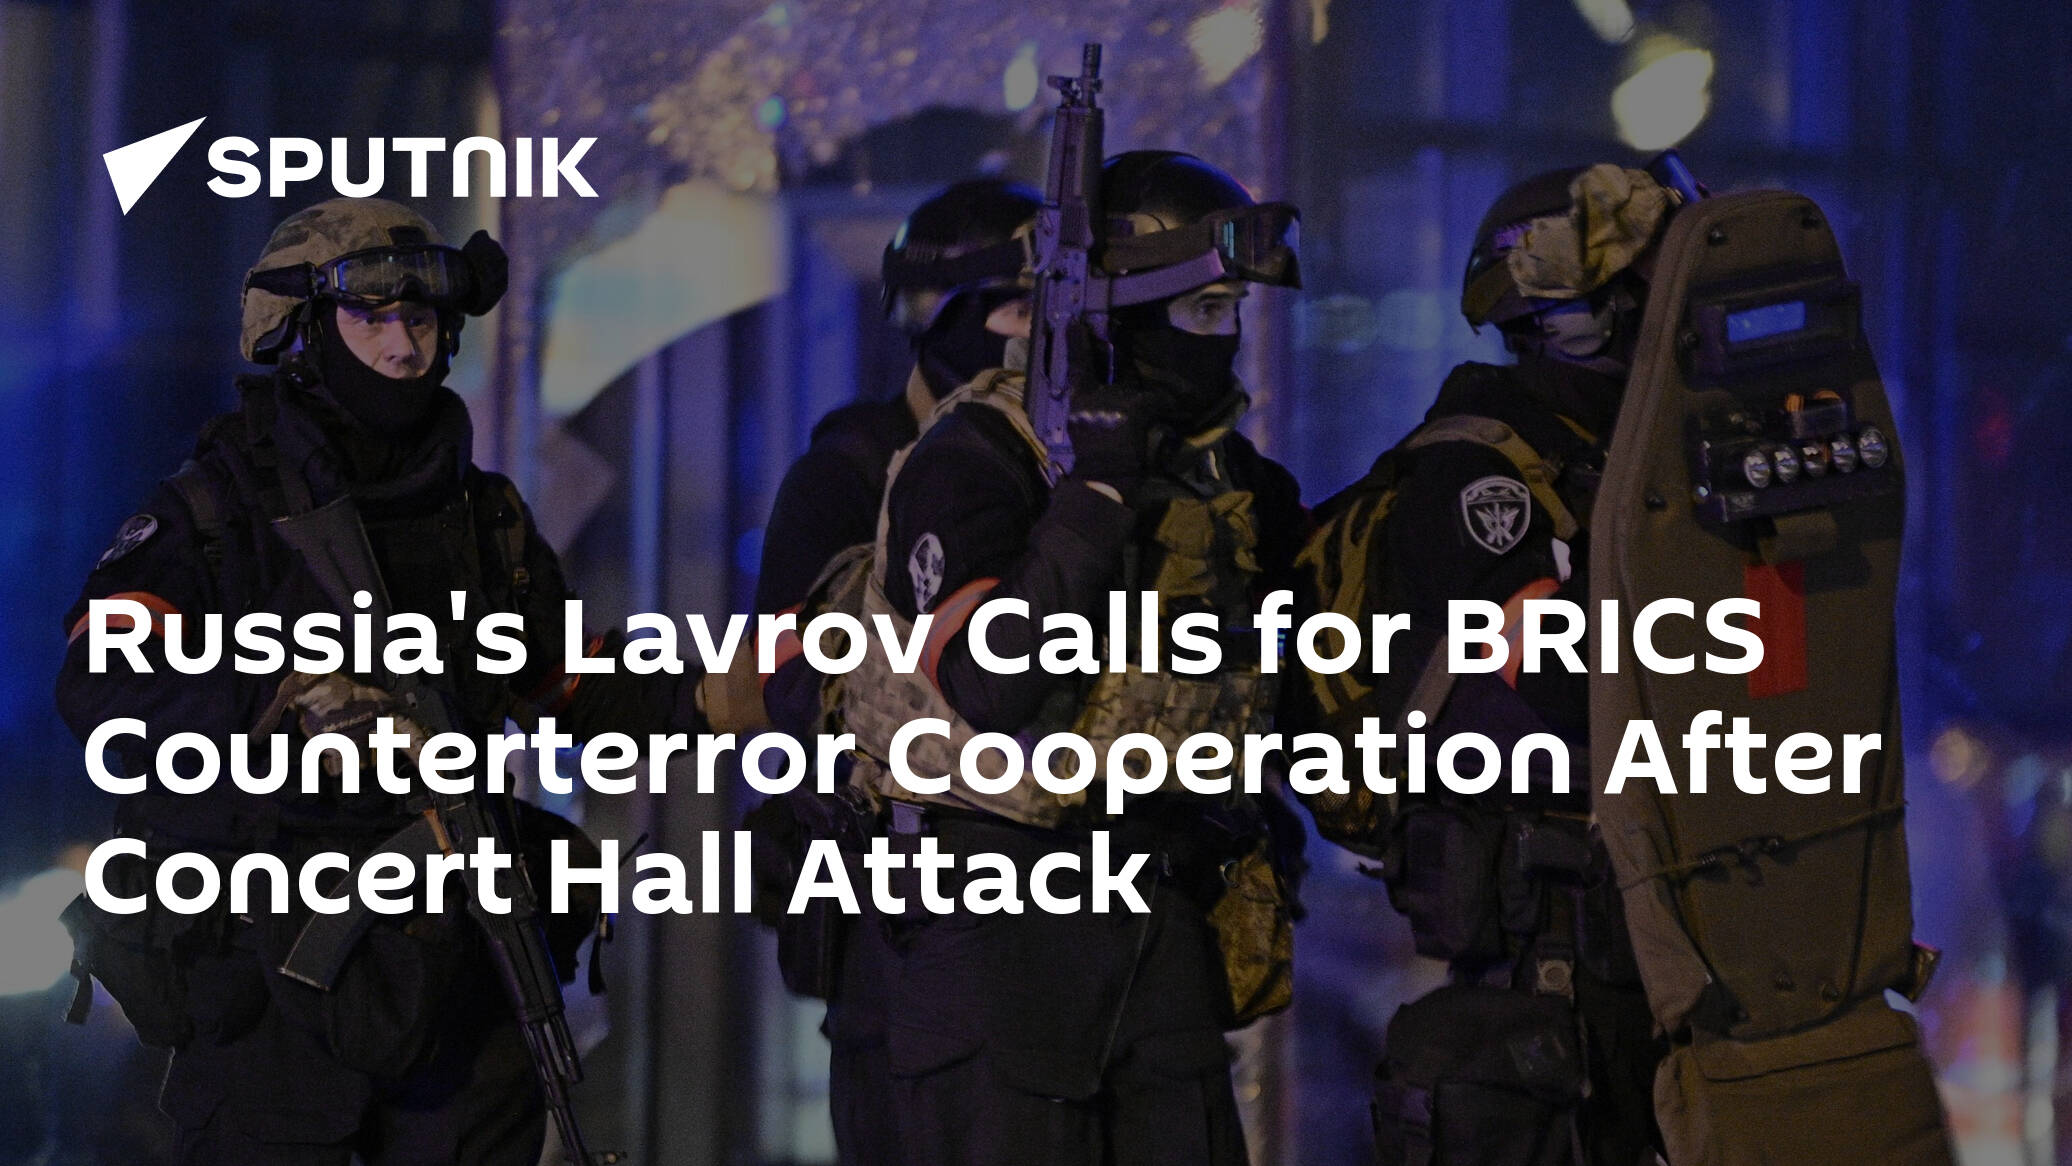 Russia's Lavrov Calls for BRICS Counterterror Cooperation After Concert Hall Attack